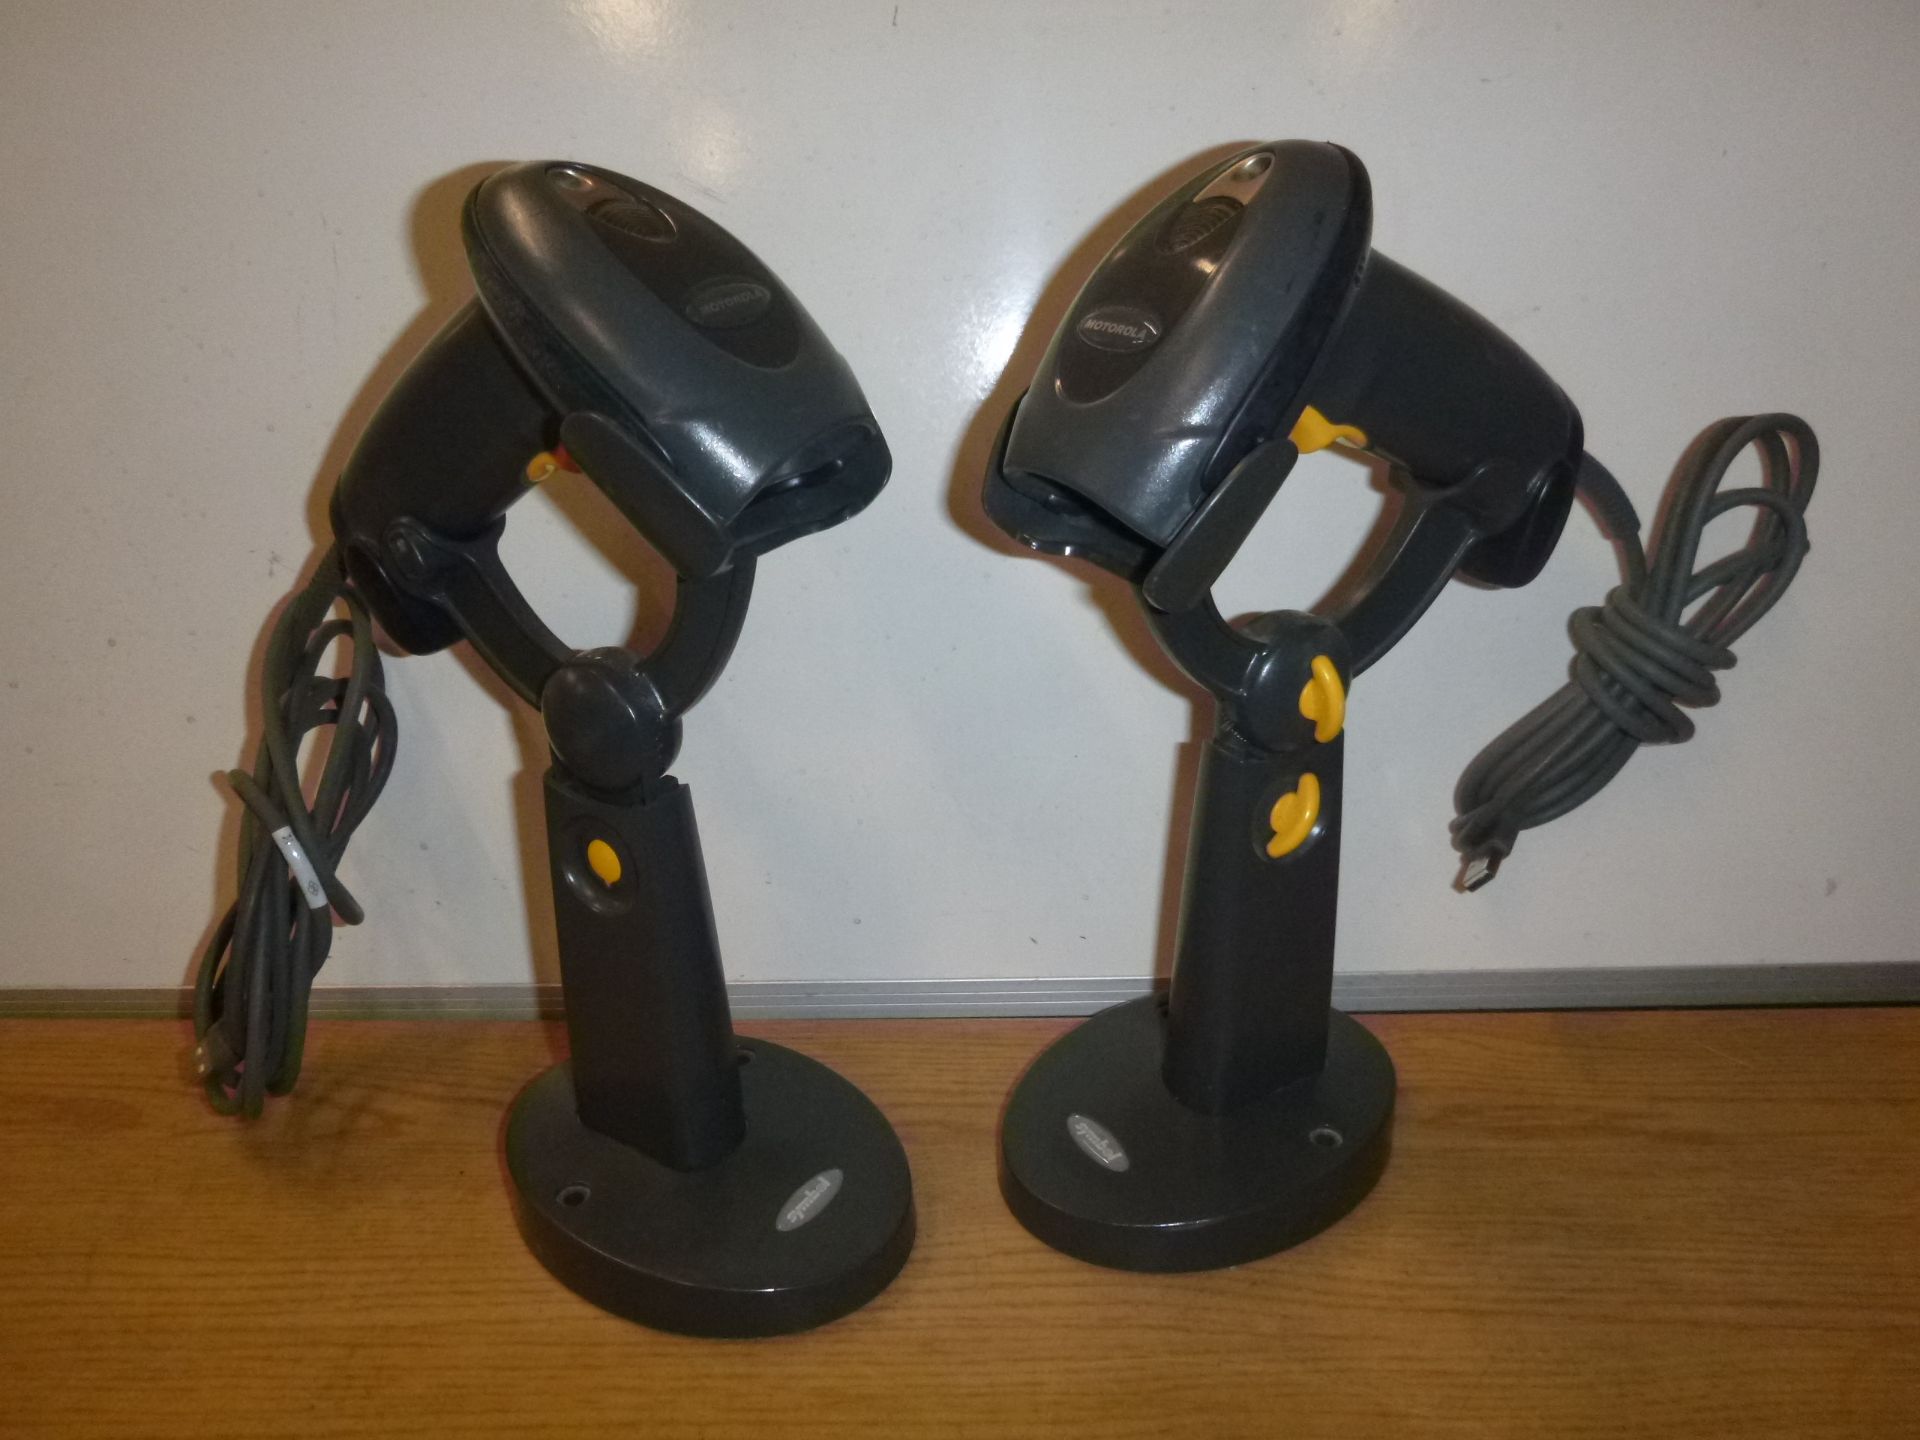 2 X MOTOROLA DS4208 USB HAND HELD BARCODE SCANNERS WITH STANDS. TESTED, WORKING.